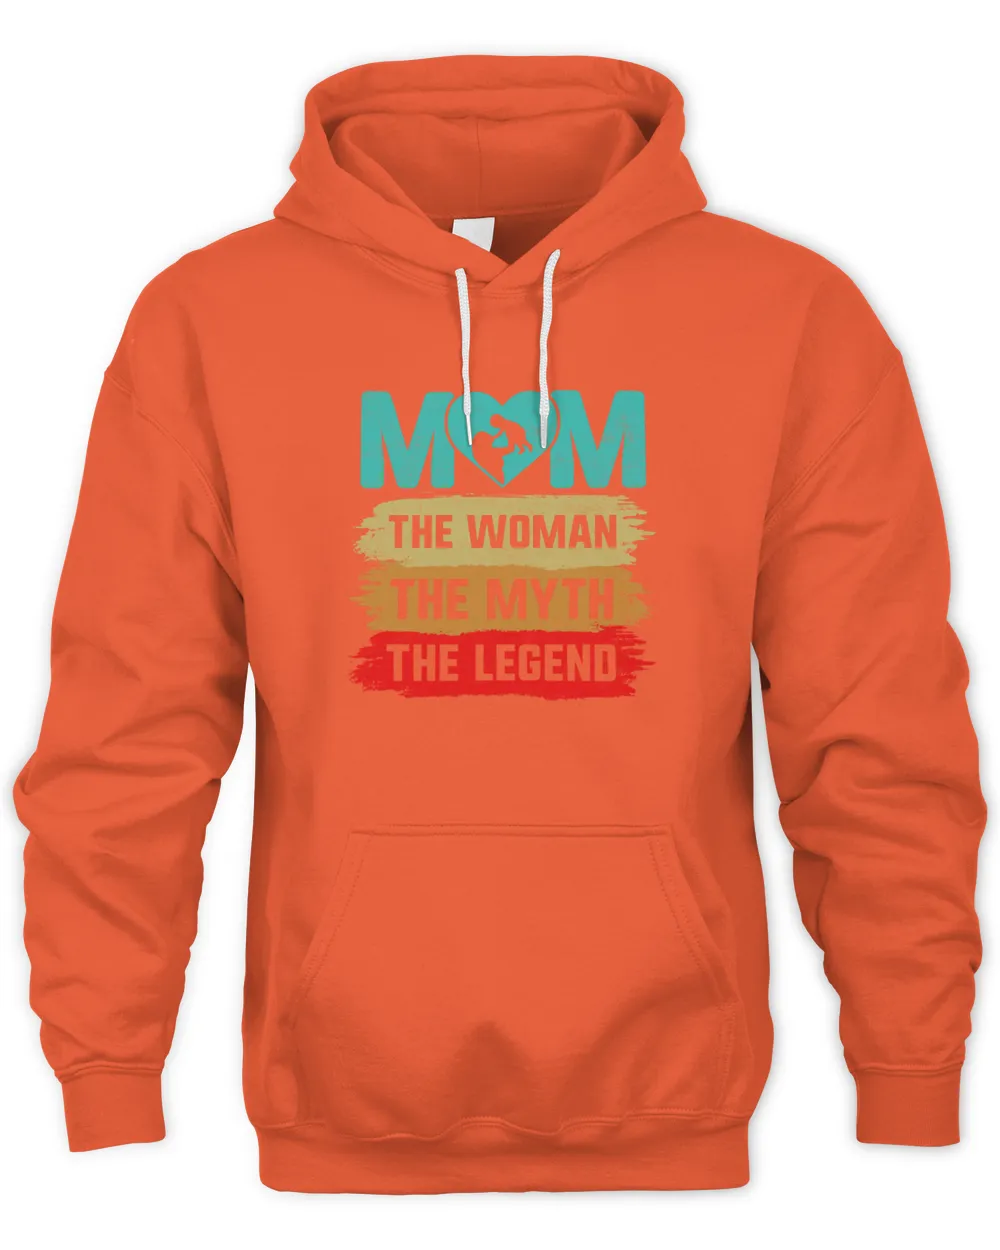 Mom The Woman The Myth The Legend Mothers Day Gift6241 T-Shirt